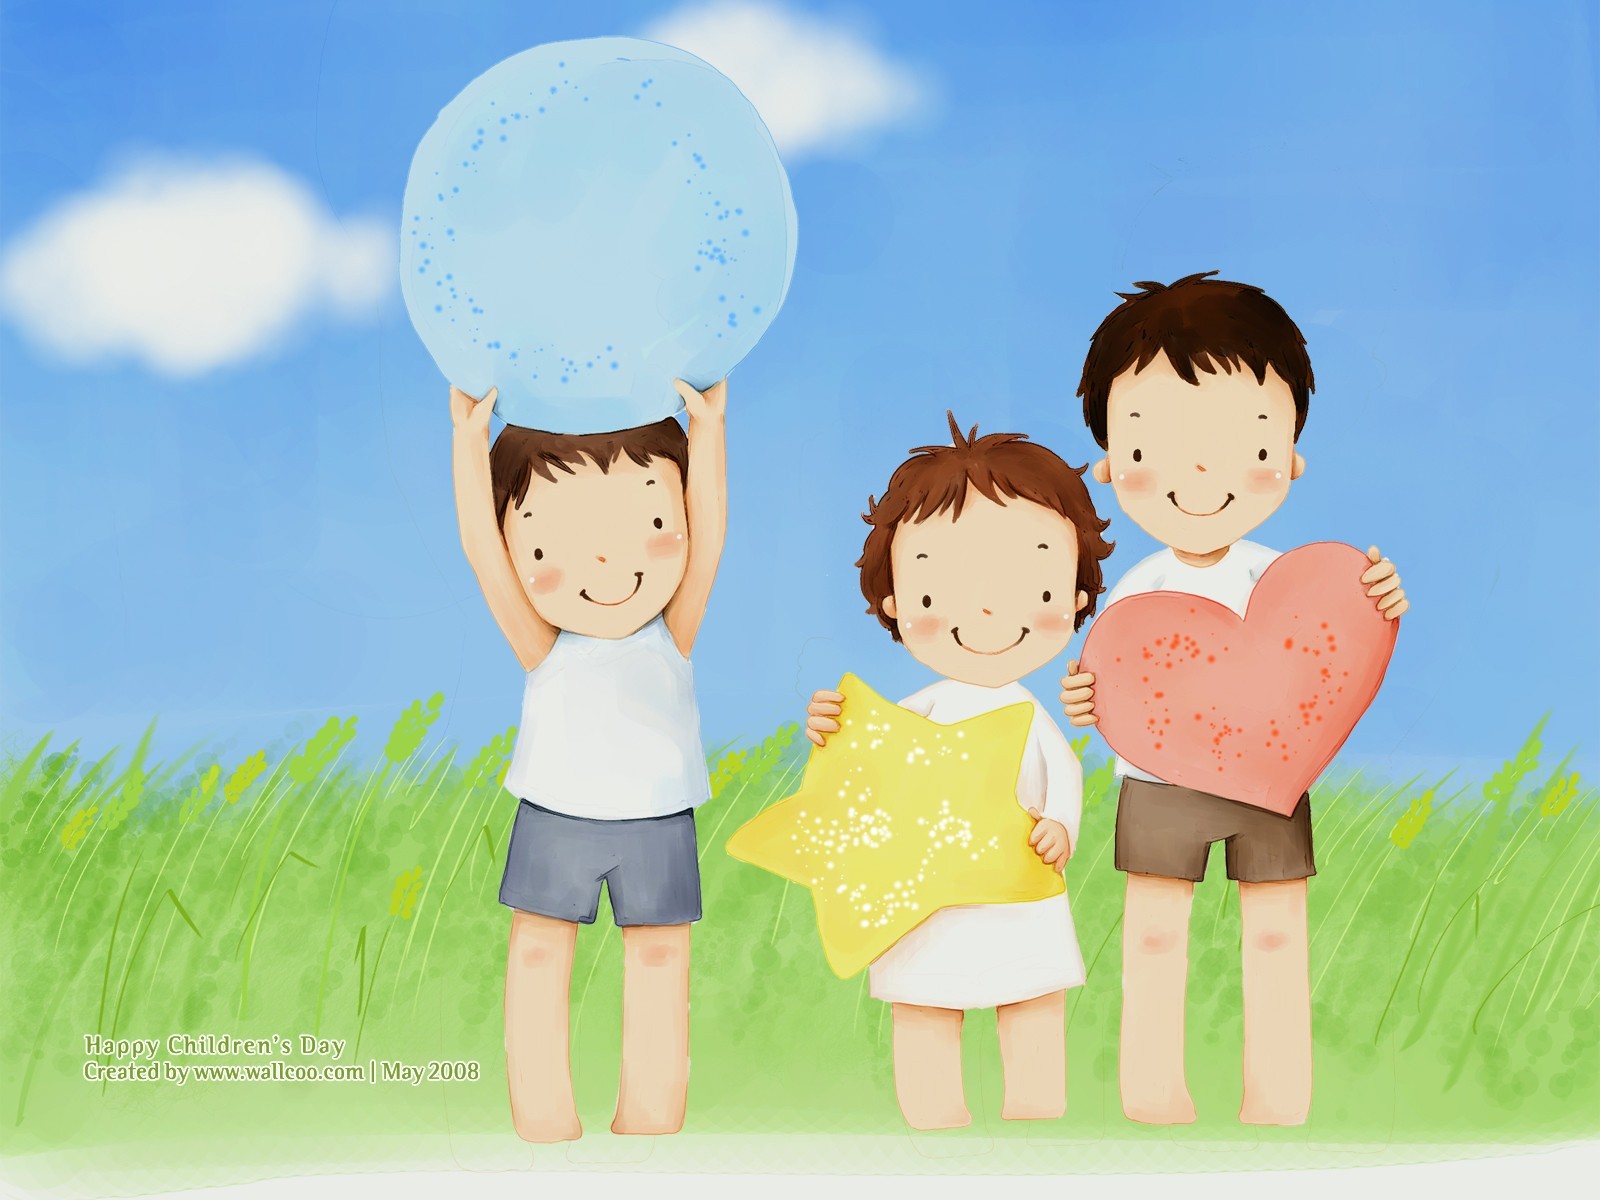 PicturesPool Childrens Day Wallpaper Greetings KidsFunDrawing